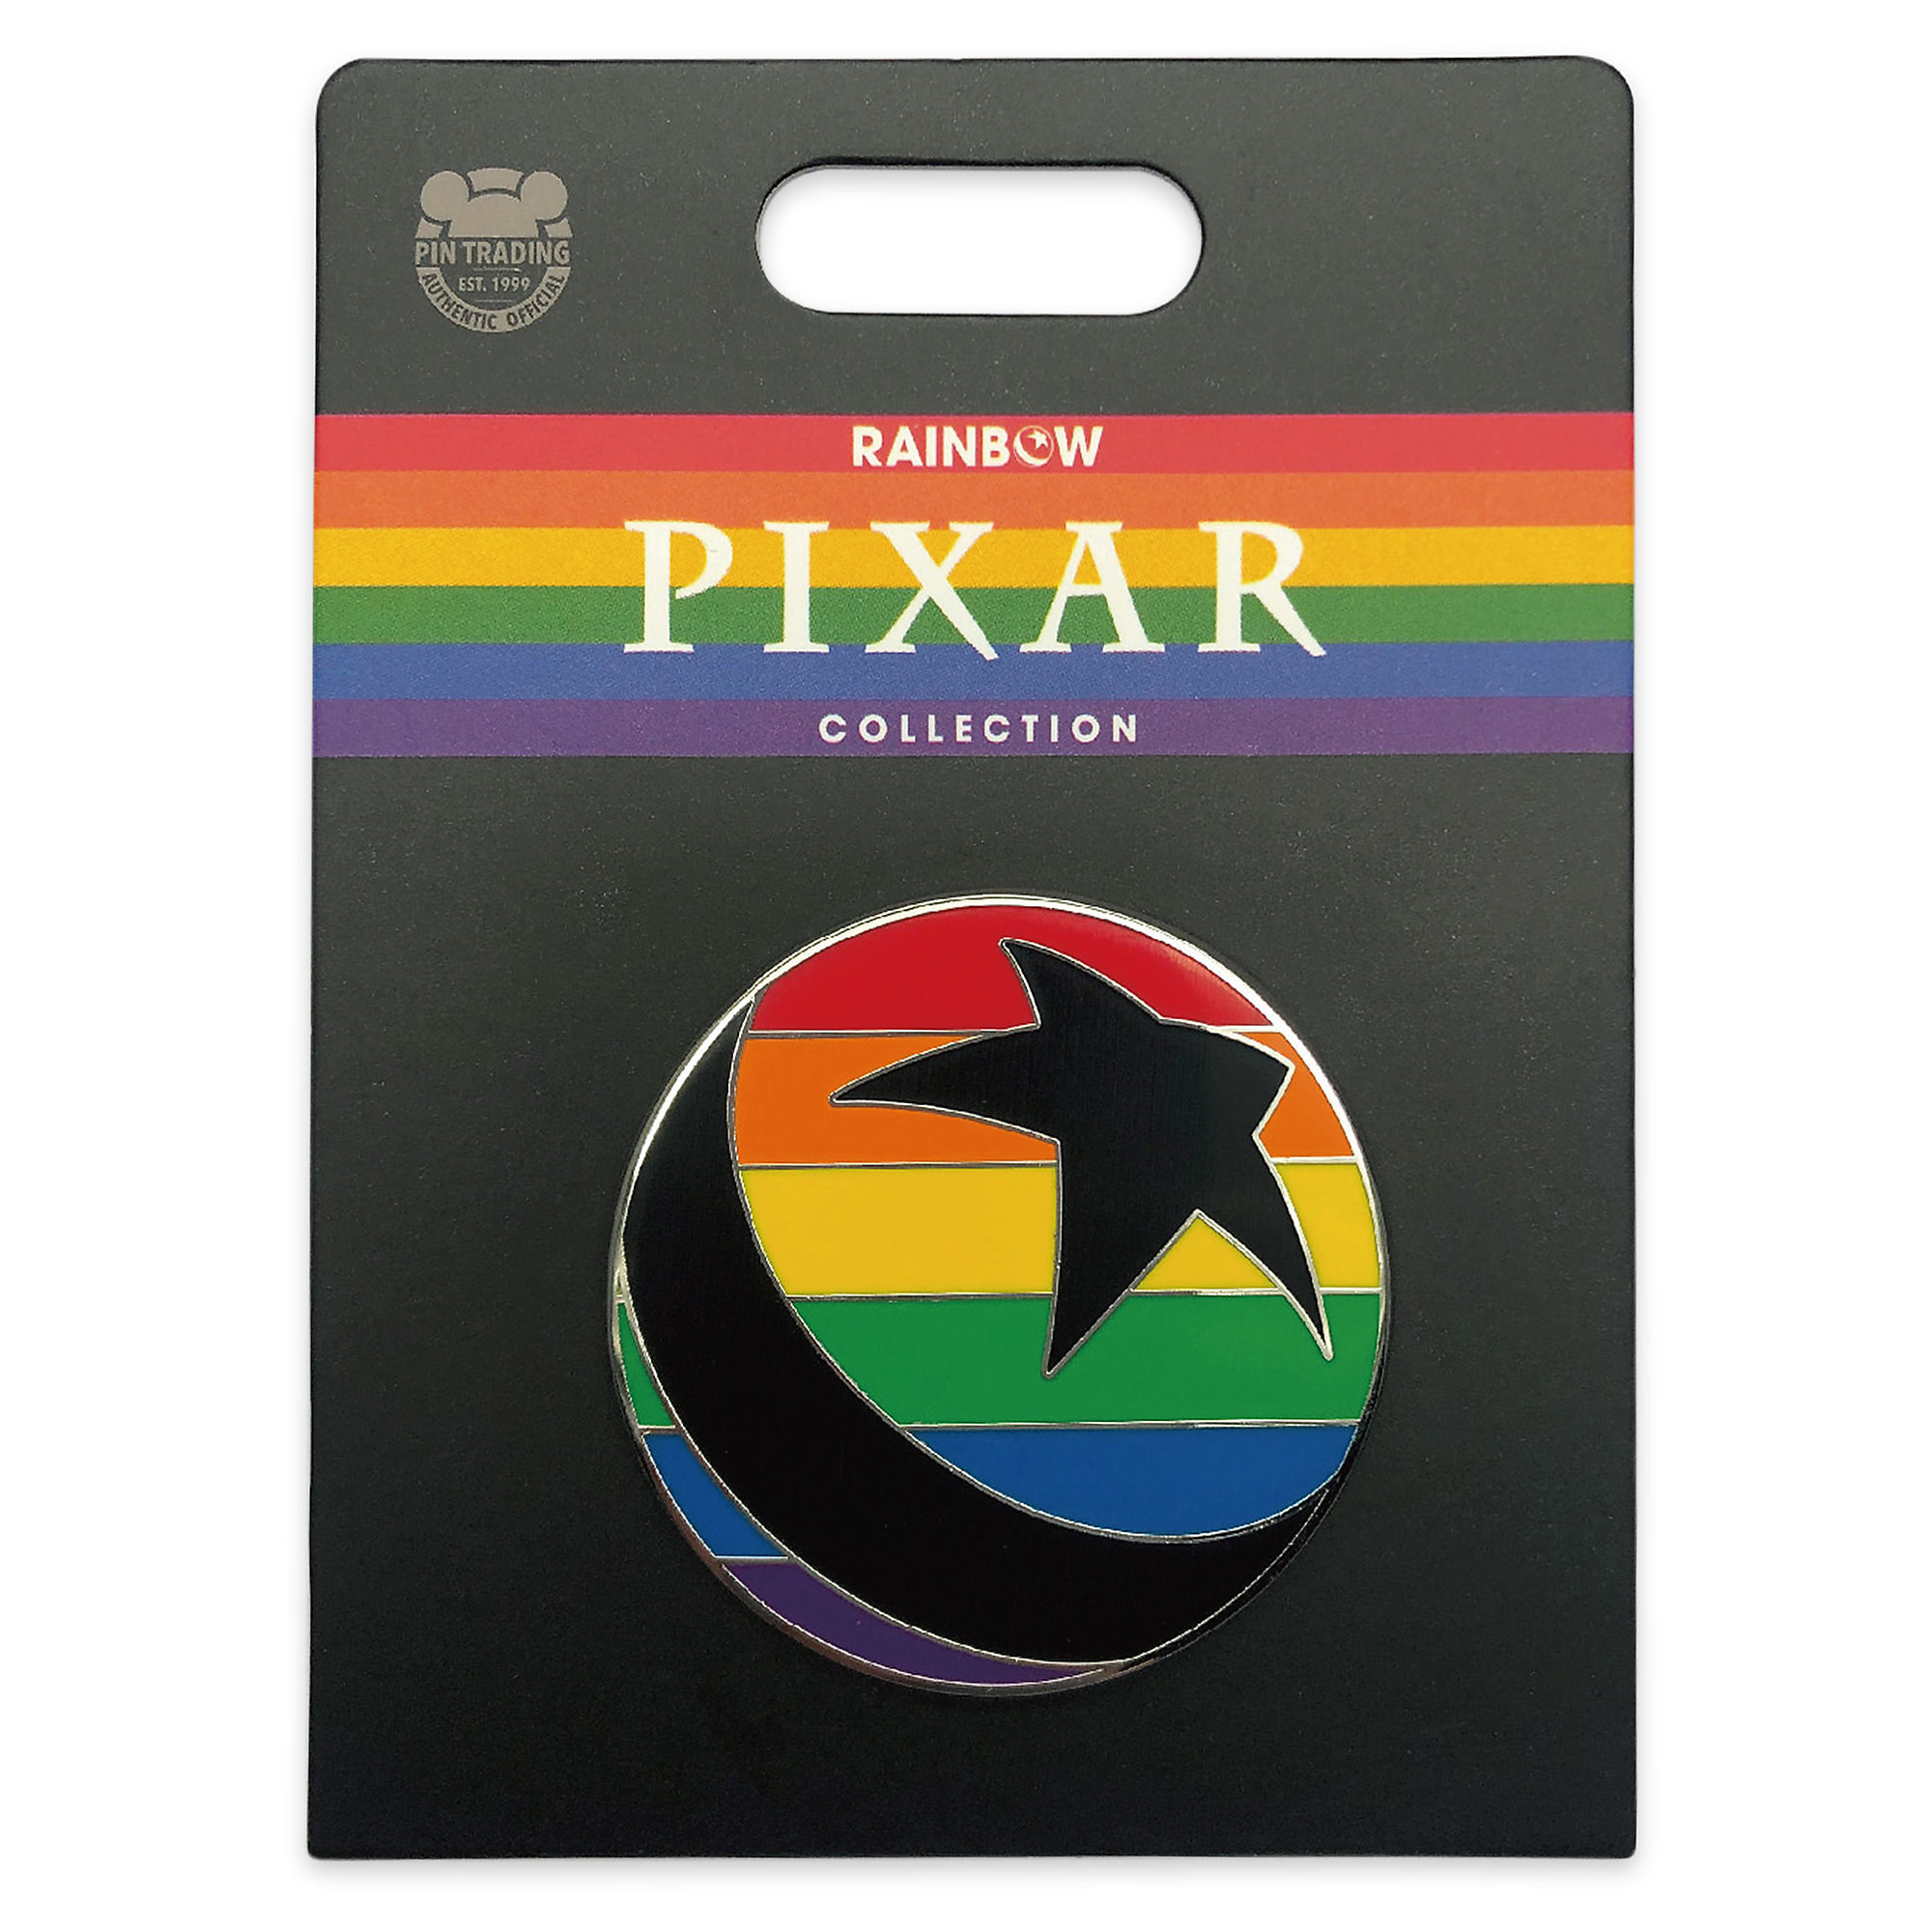 An enamel lapel pin with the Pixar bouncy ball in rainbow coloring